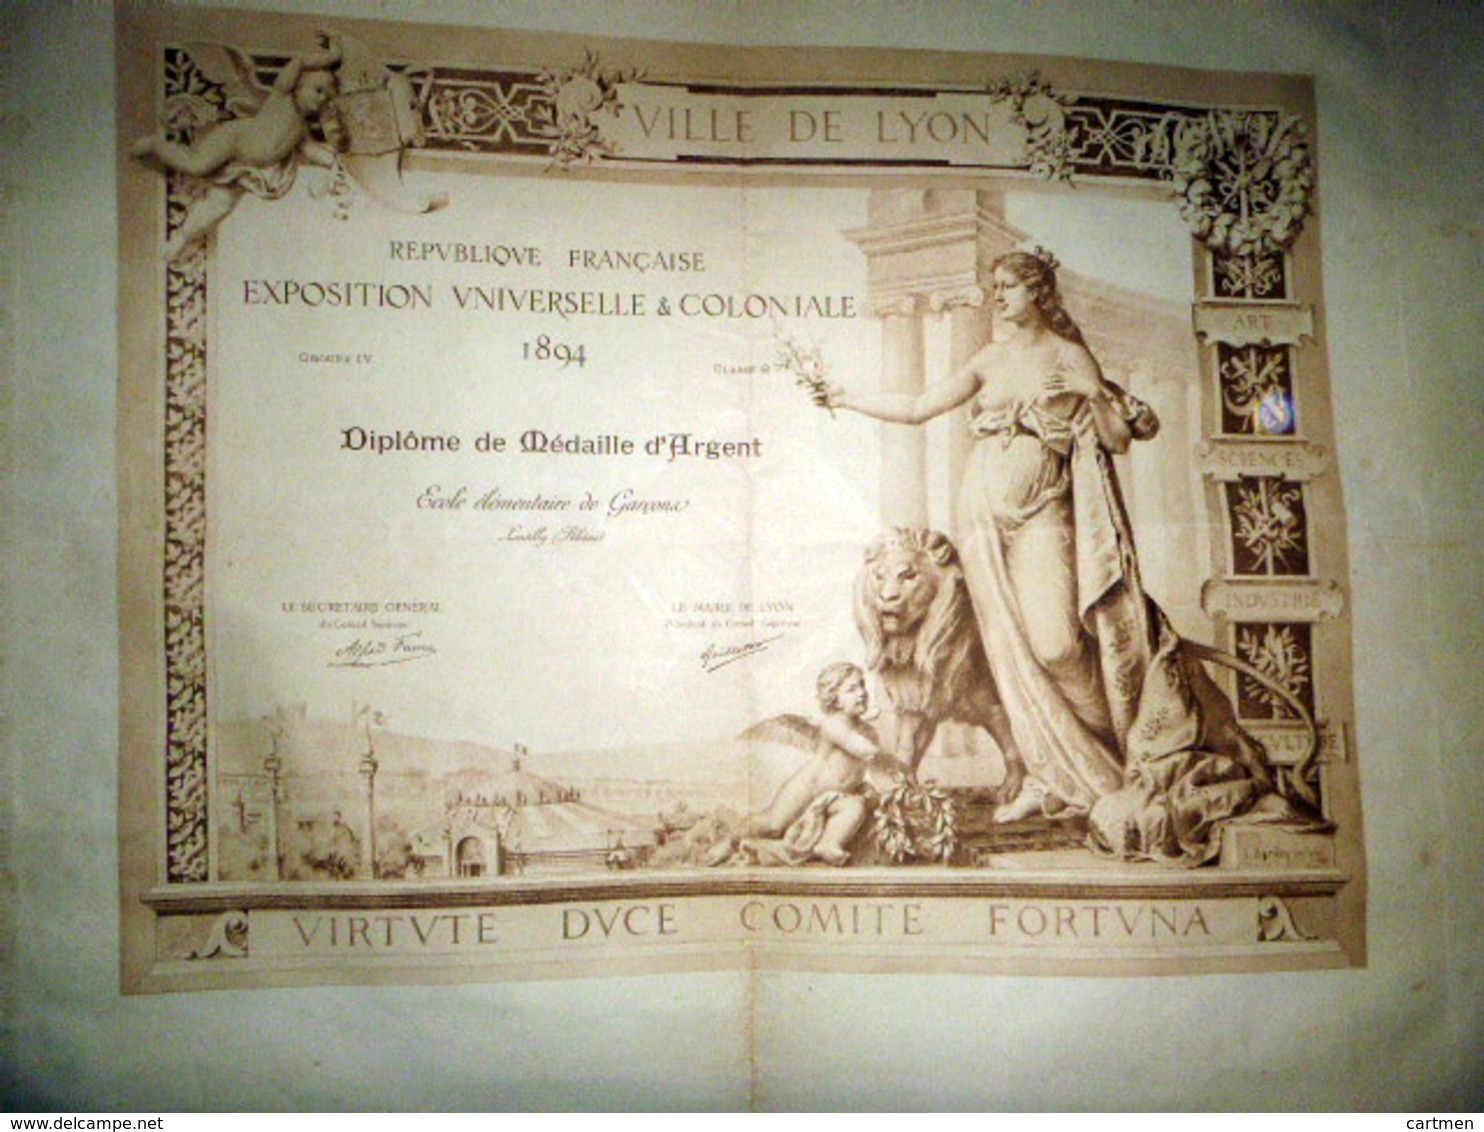 EXPOSITION COLONIALE UNIVERSELLE LYON 1894 DIPLOME MEDAILLE ARGENT LITHO SIGNEE L BARDEY 78 X 55 Cm - Historical Documents